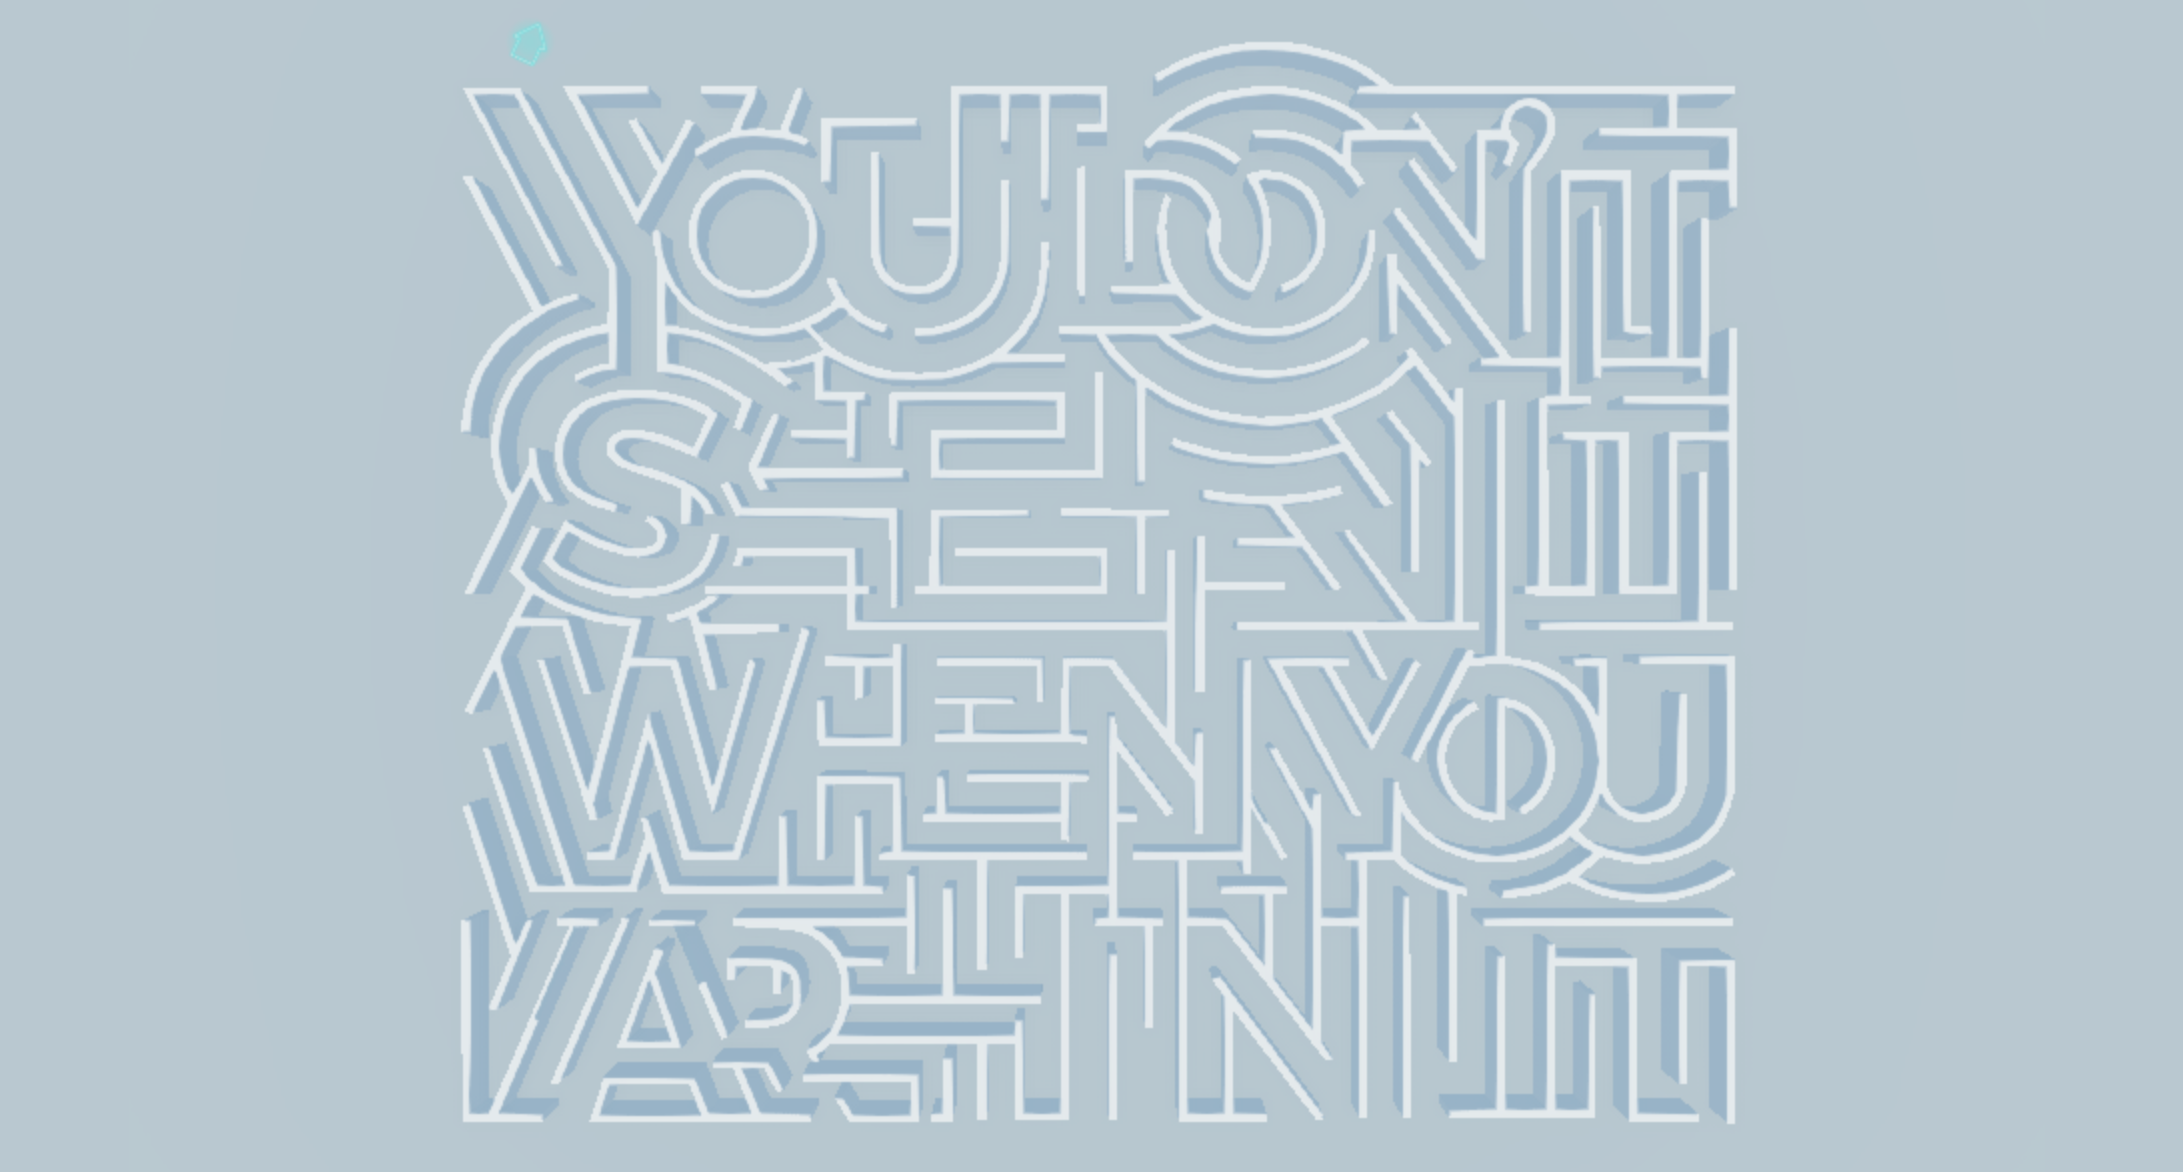 A blue poster with some white 3D text design that looks like a maze.